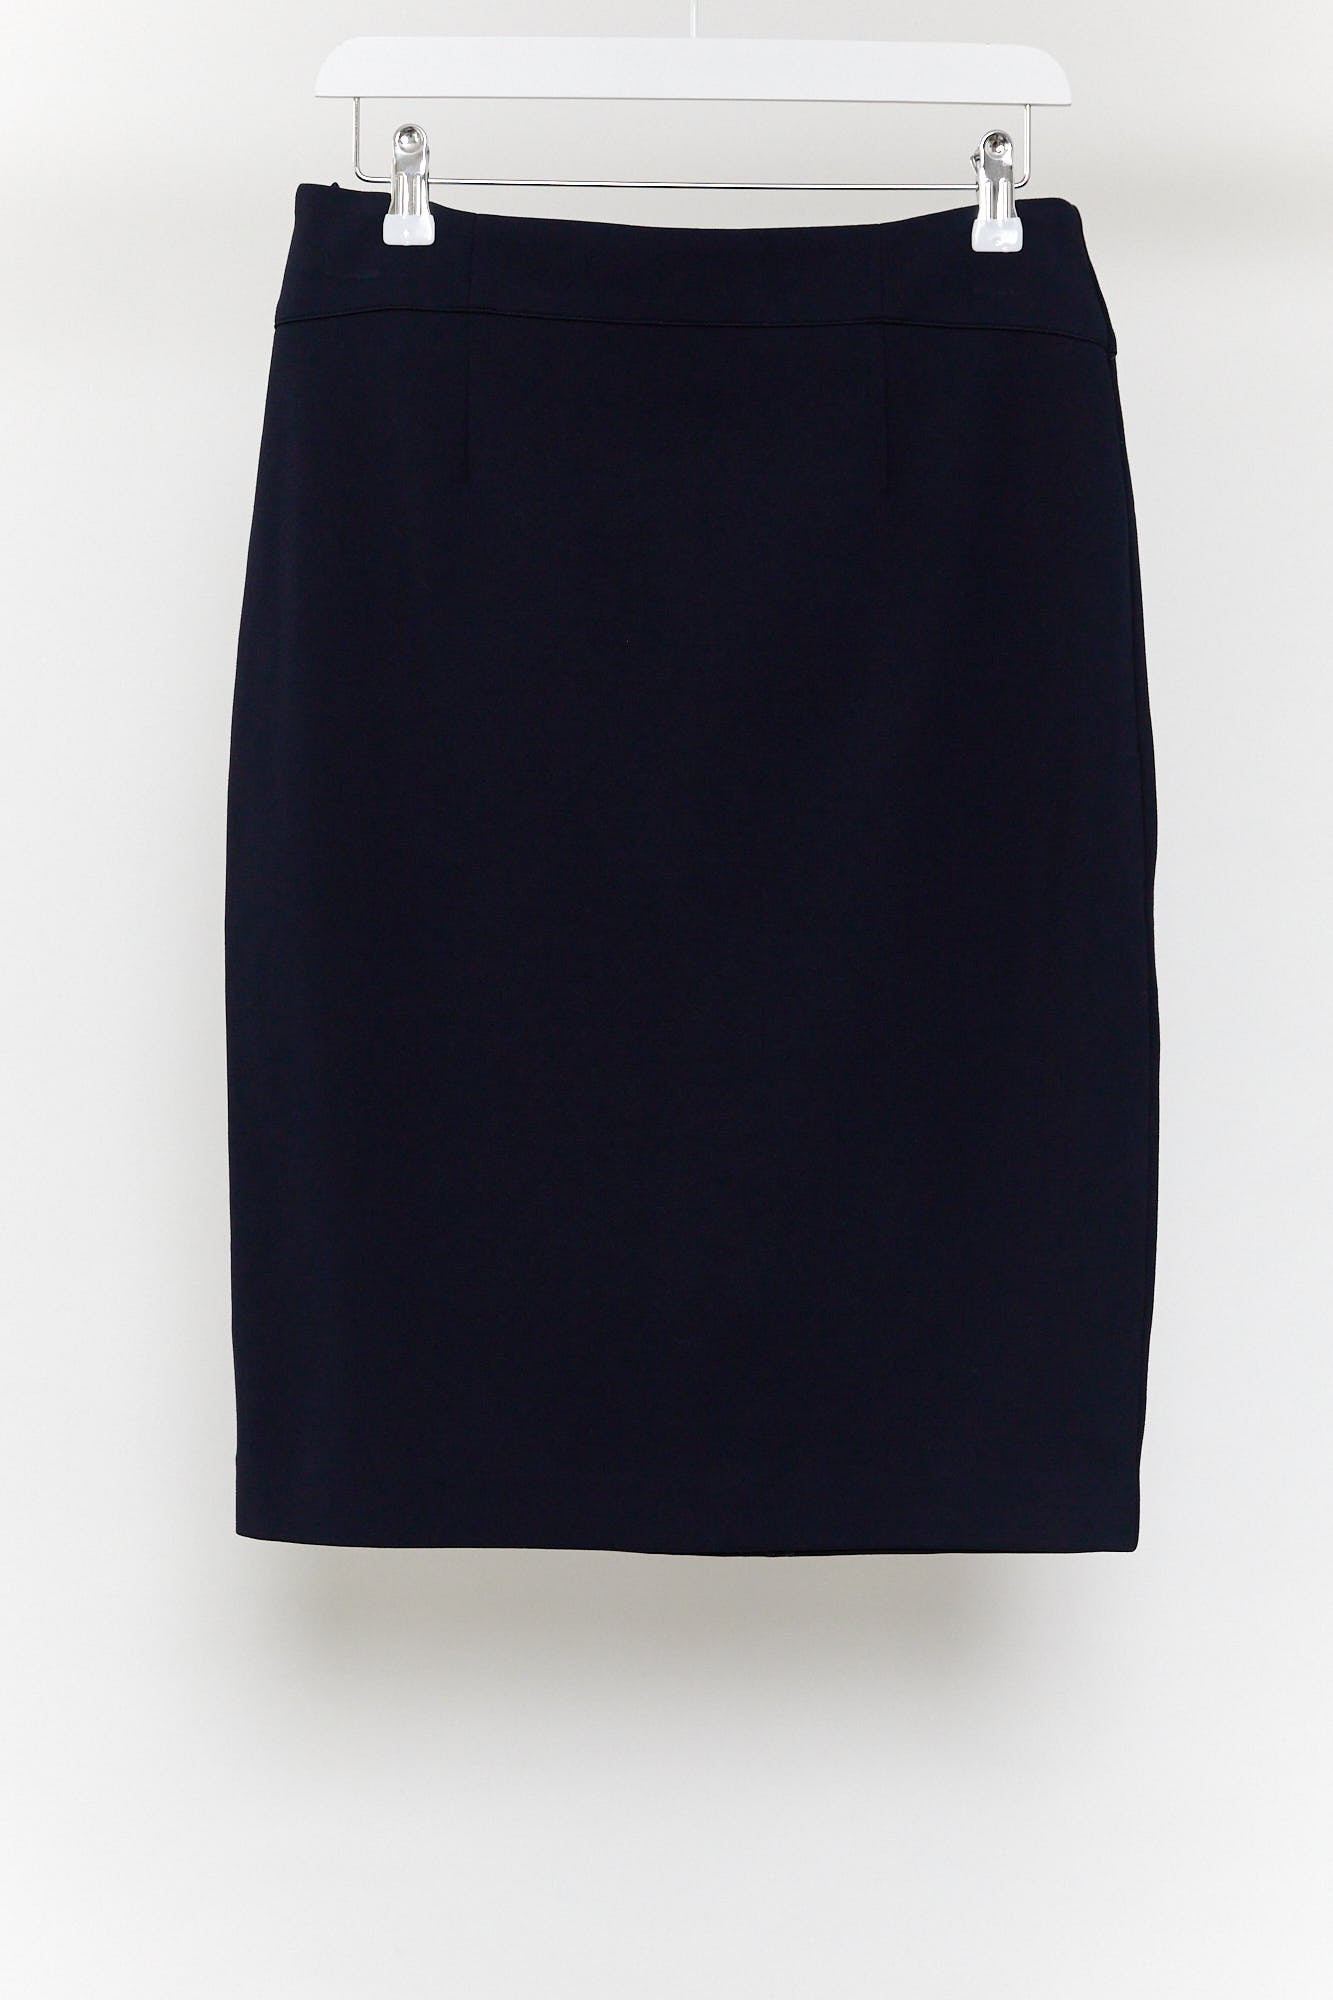 Womens Navy pencil skirt size small